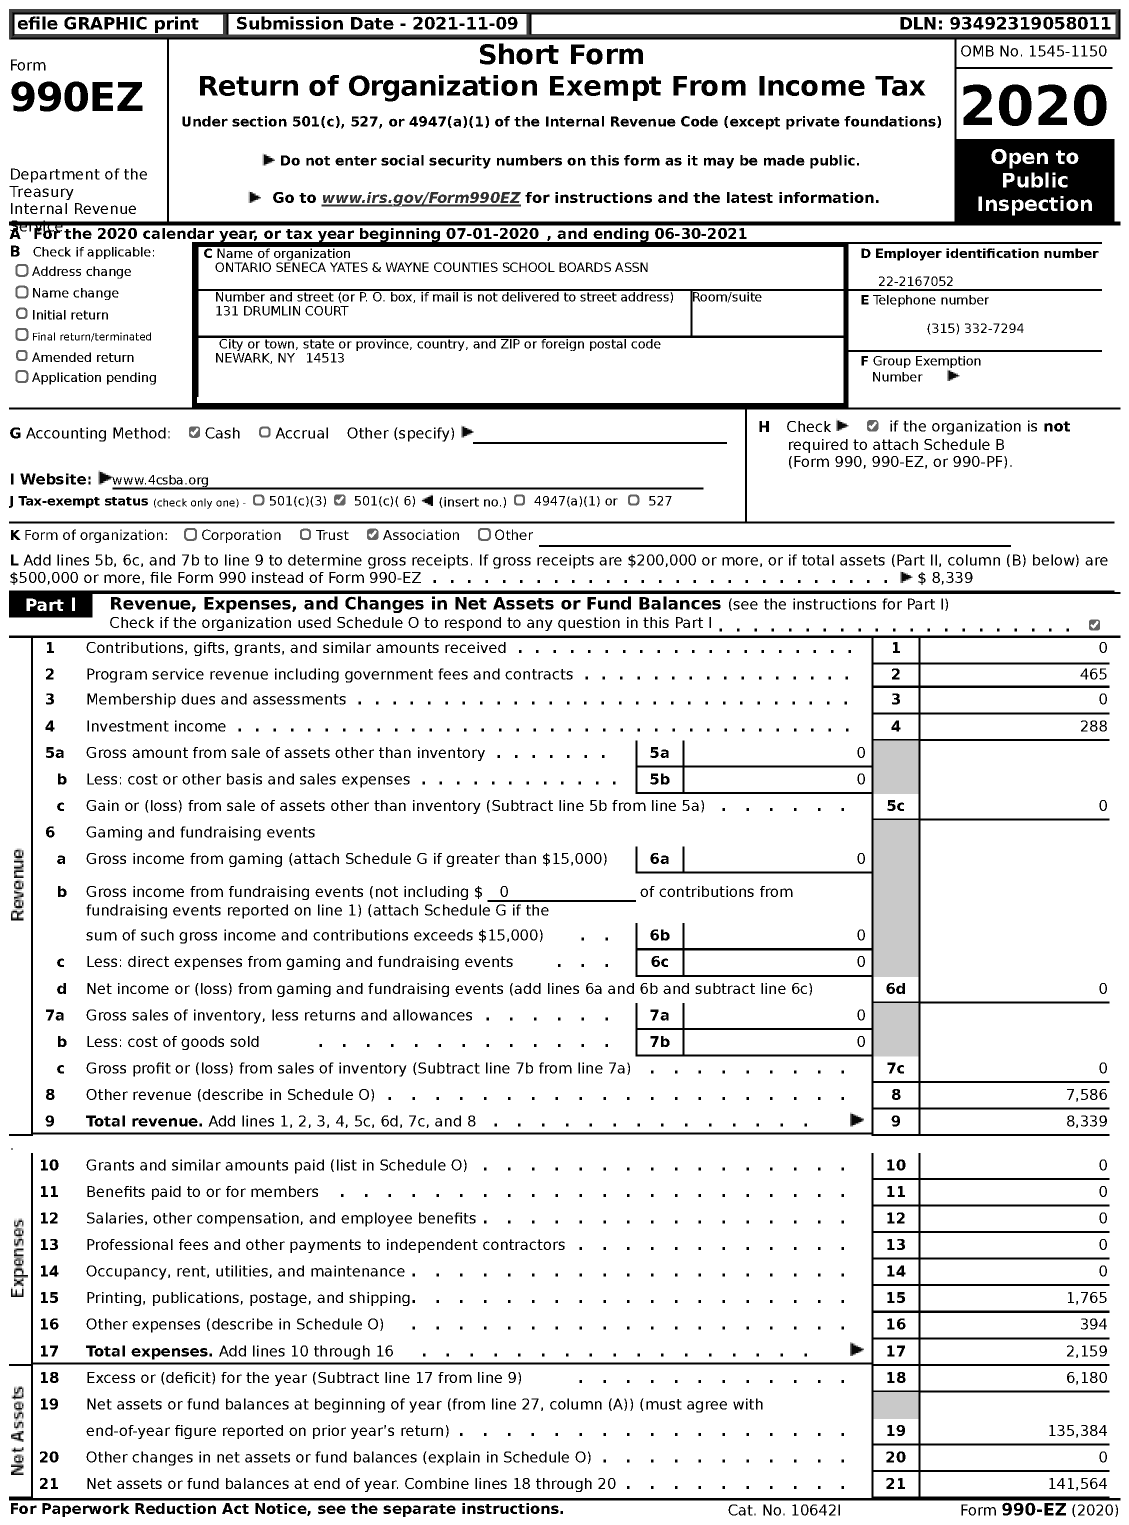 Image of first page of 2020 Form 990EZ for Ontario Seneca Yates and Wayne Counties School Boards Association